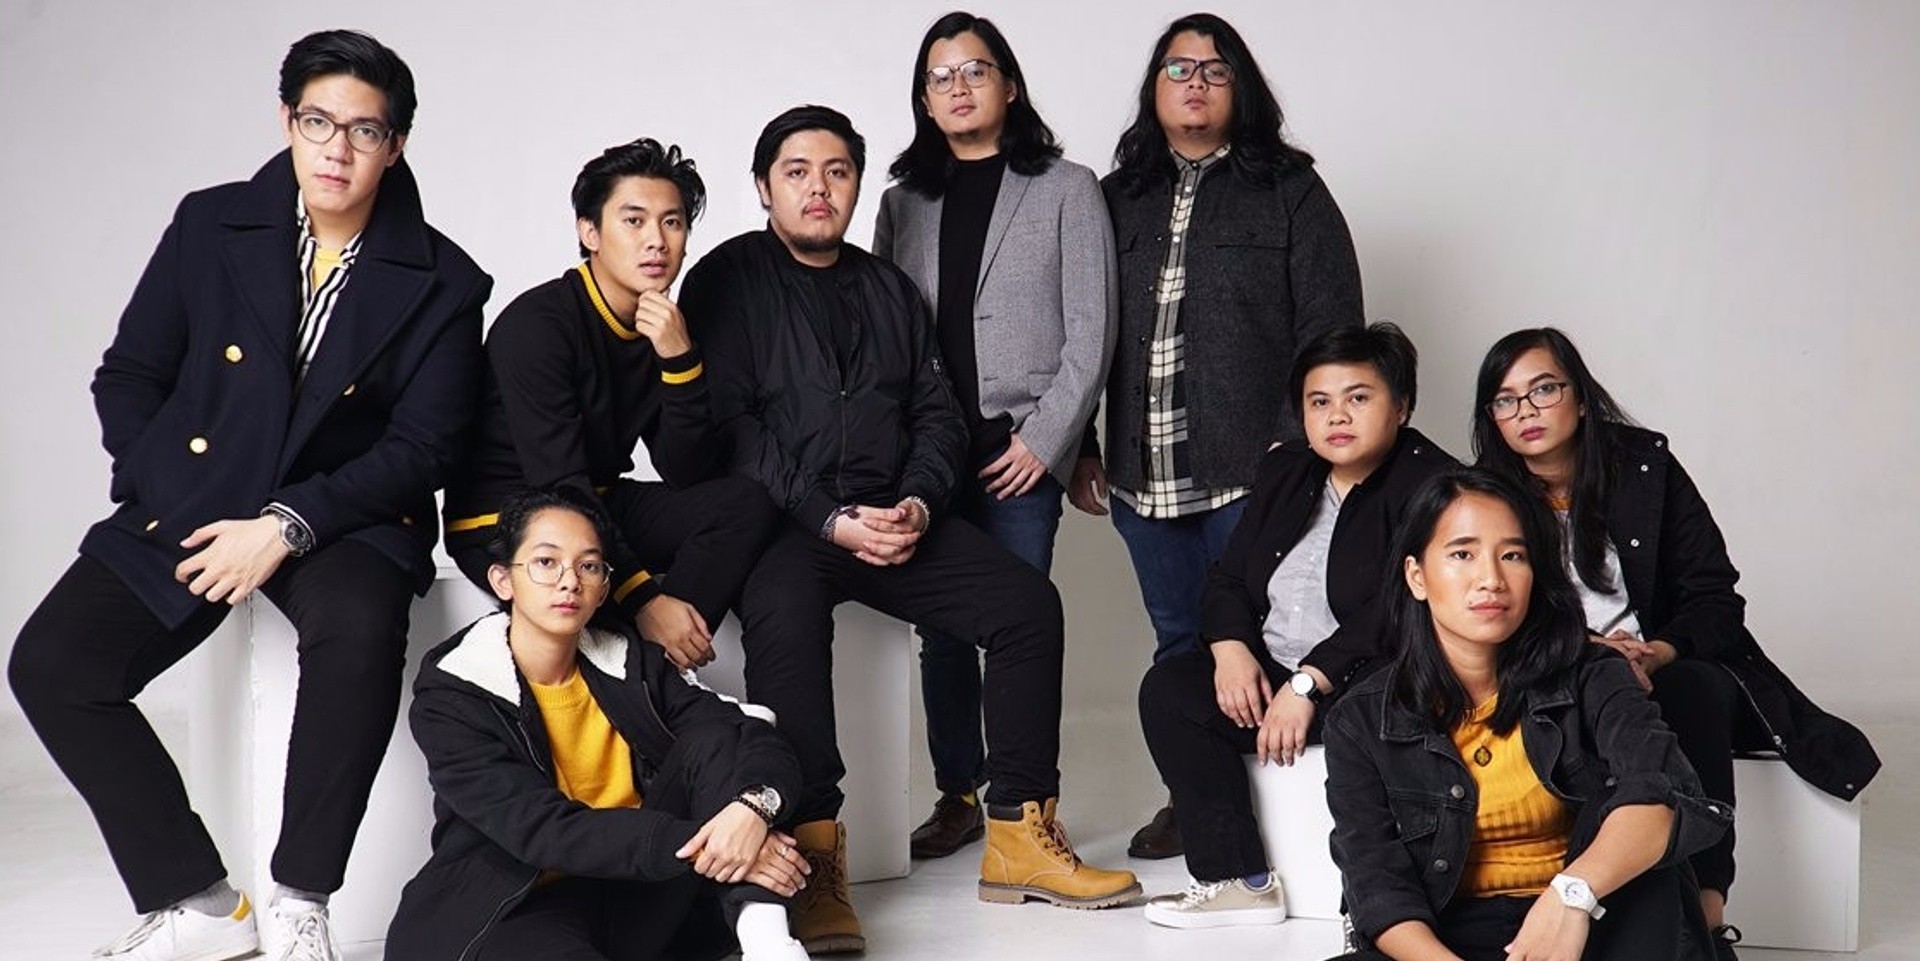 H&M enlists Sud, Callalily, and Ben&Ben for H&M Loves Music campaign